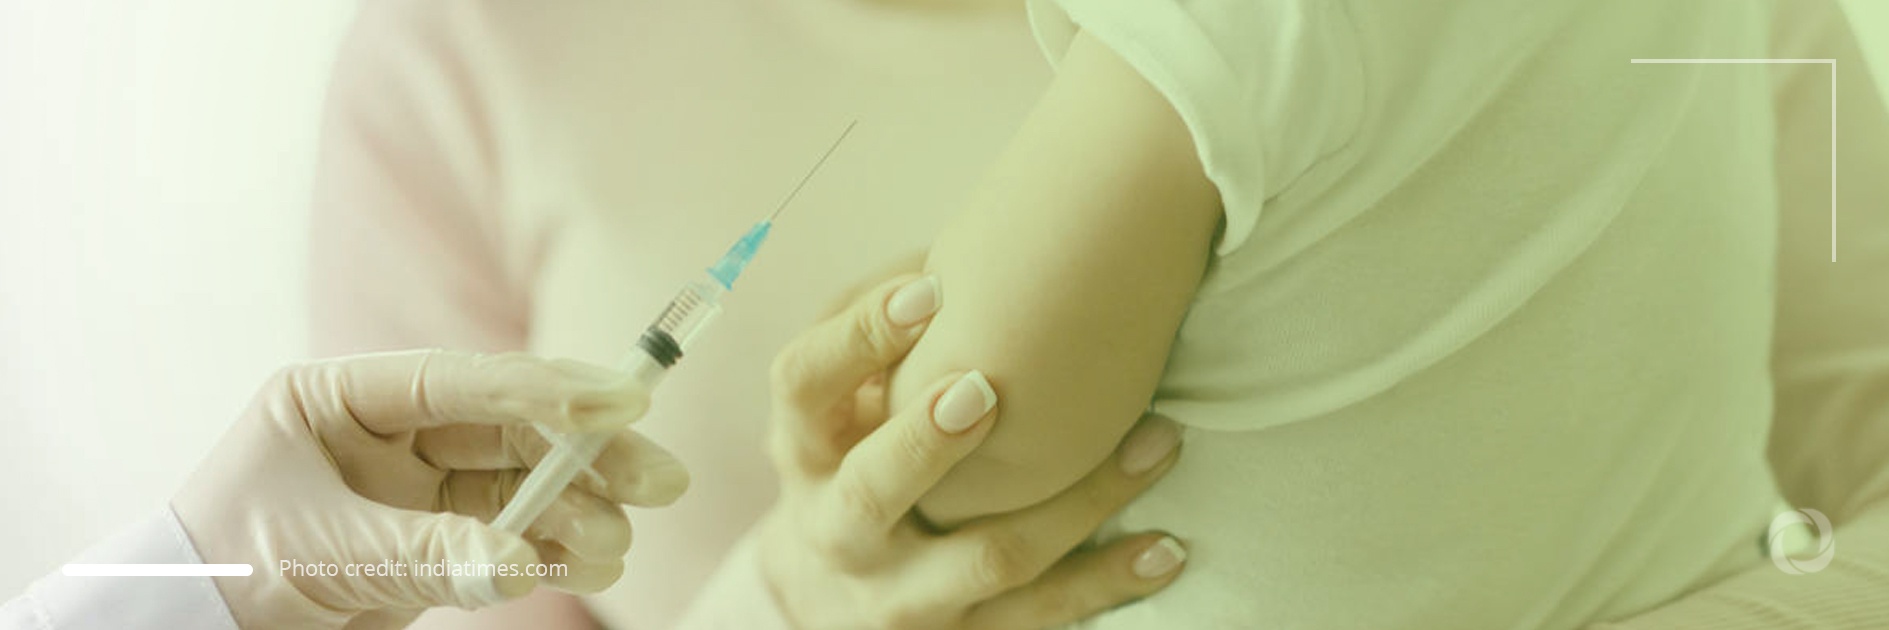 5.3 million children in South Asia missed out on essential vaccines due to COVID-19